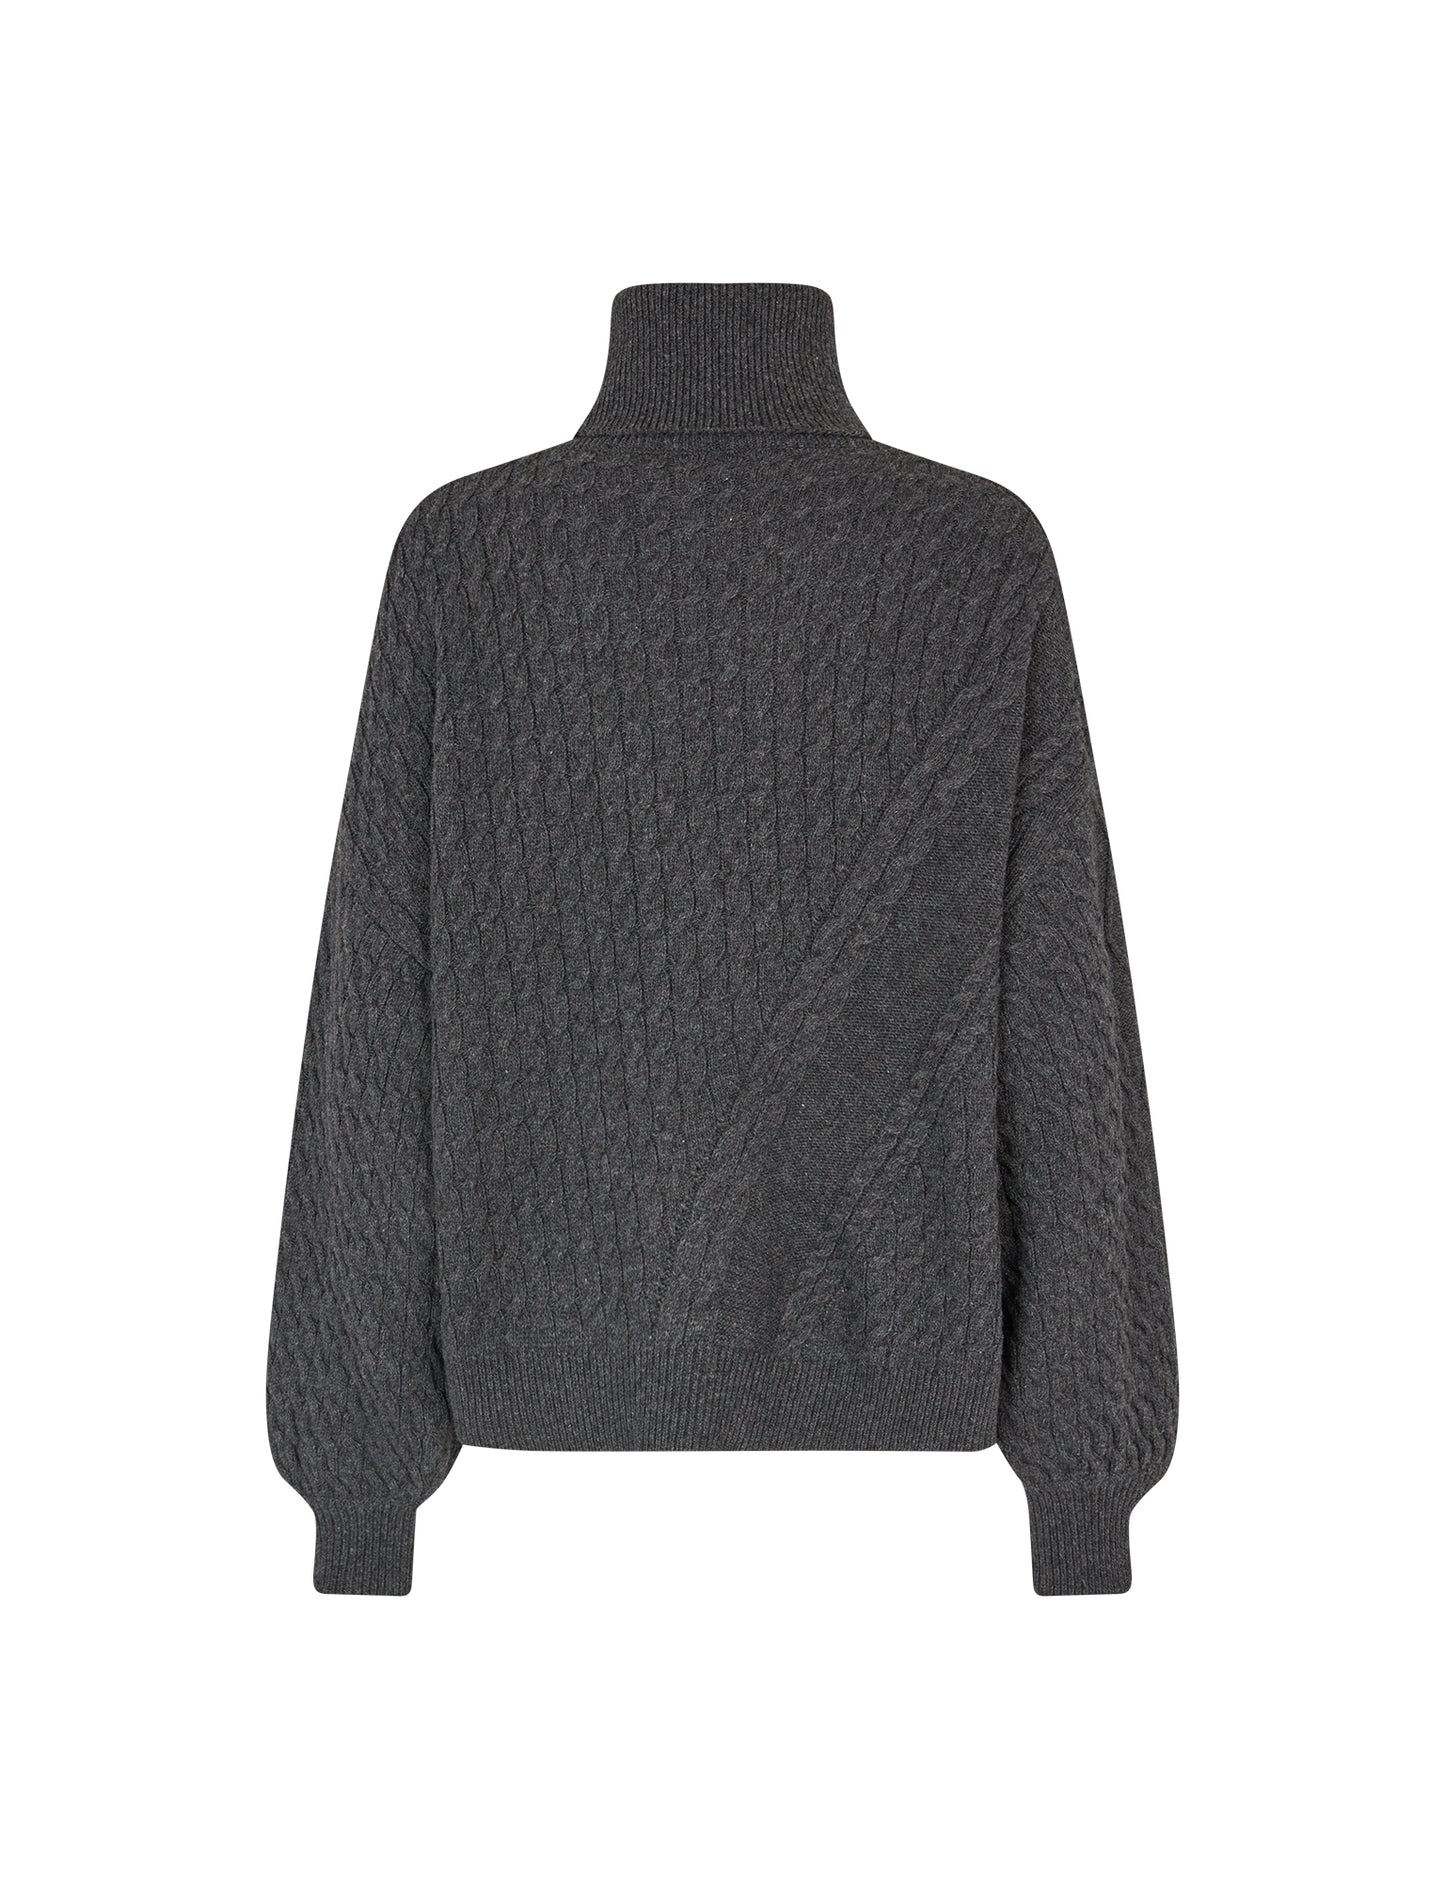 Recycled Wool Mix Rerik Sweater, Charcoal Melange